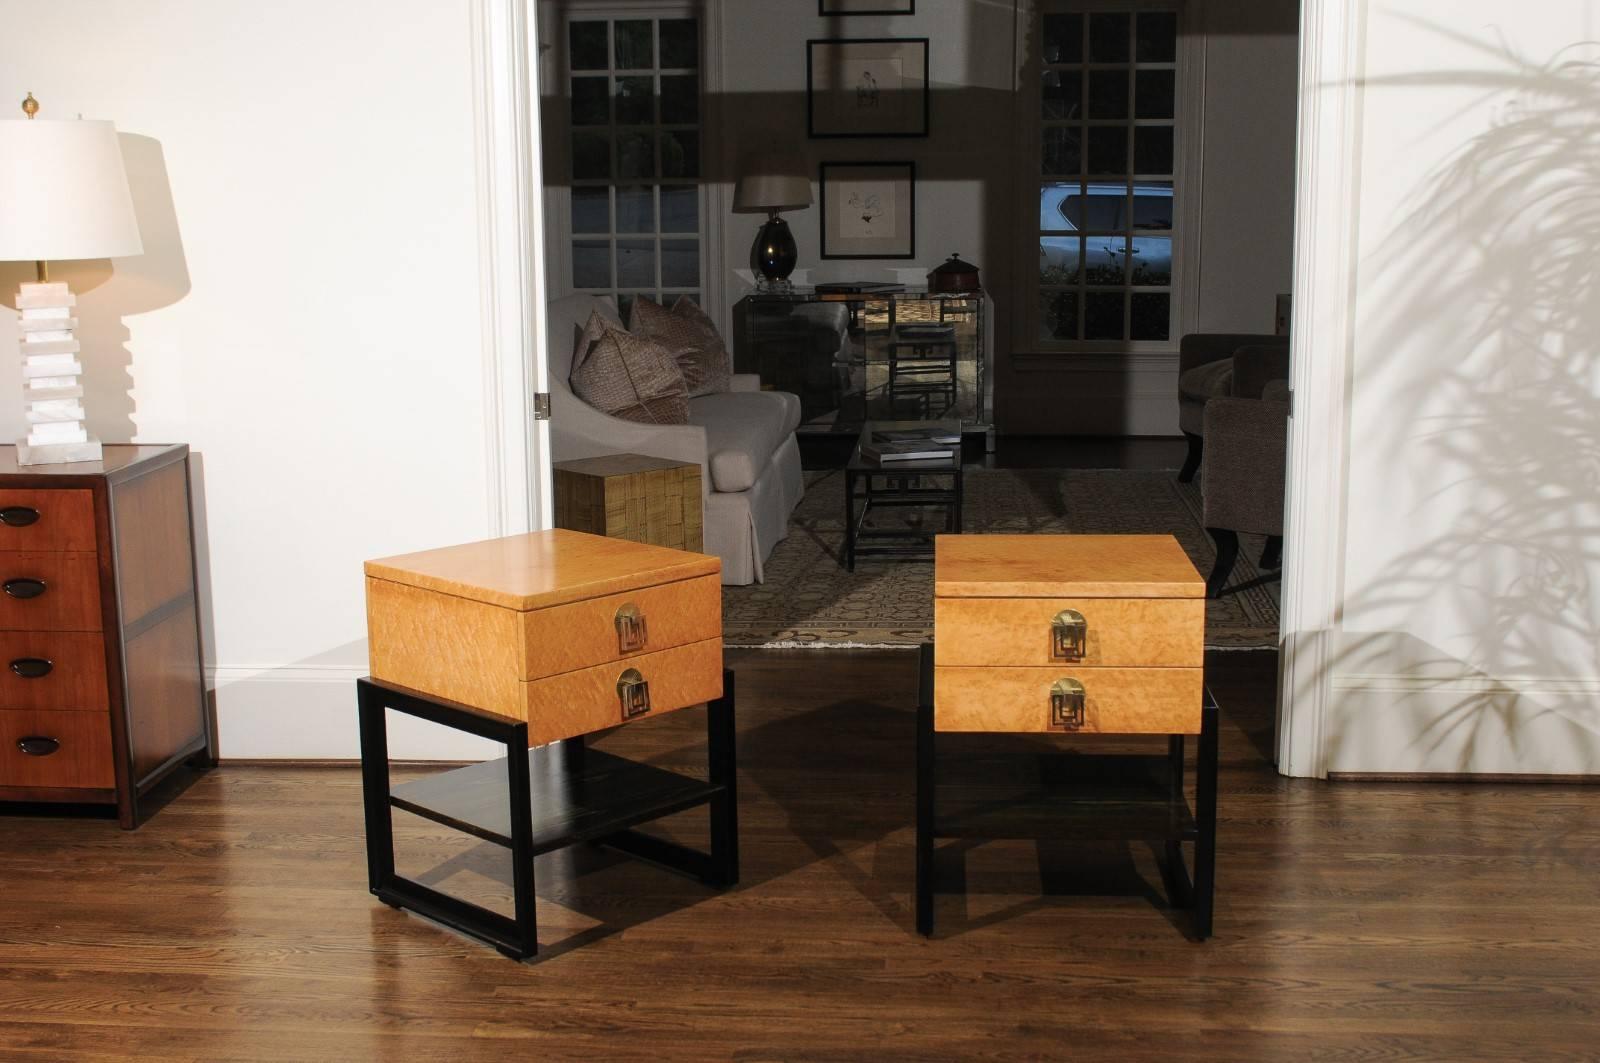 Magnificent Pair of End Tables by Renzo Rutili in Birdseye Maple, circa 1955 For Sale 1